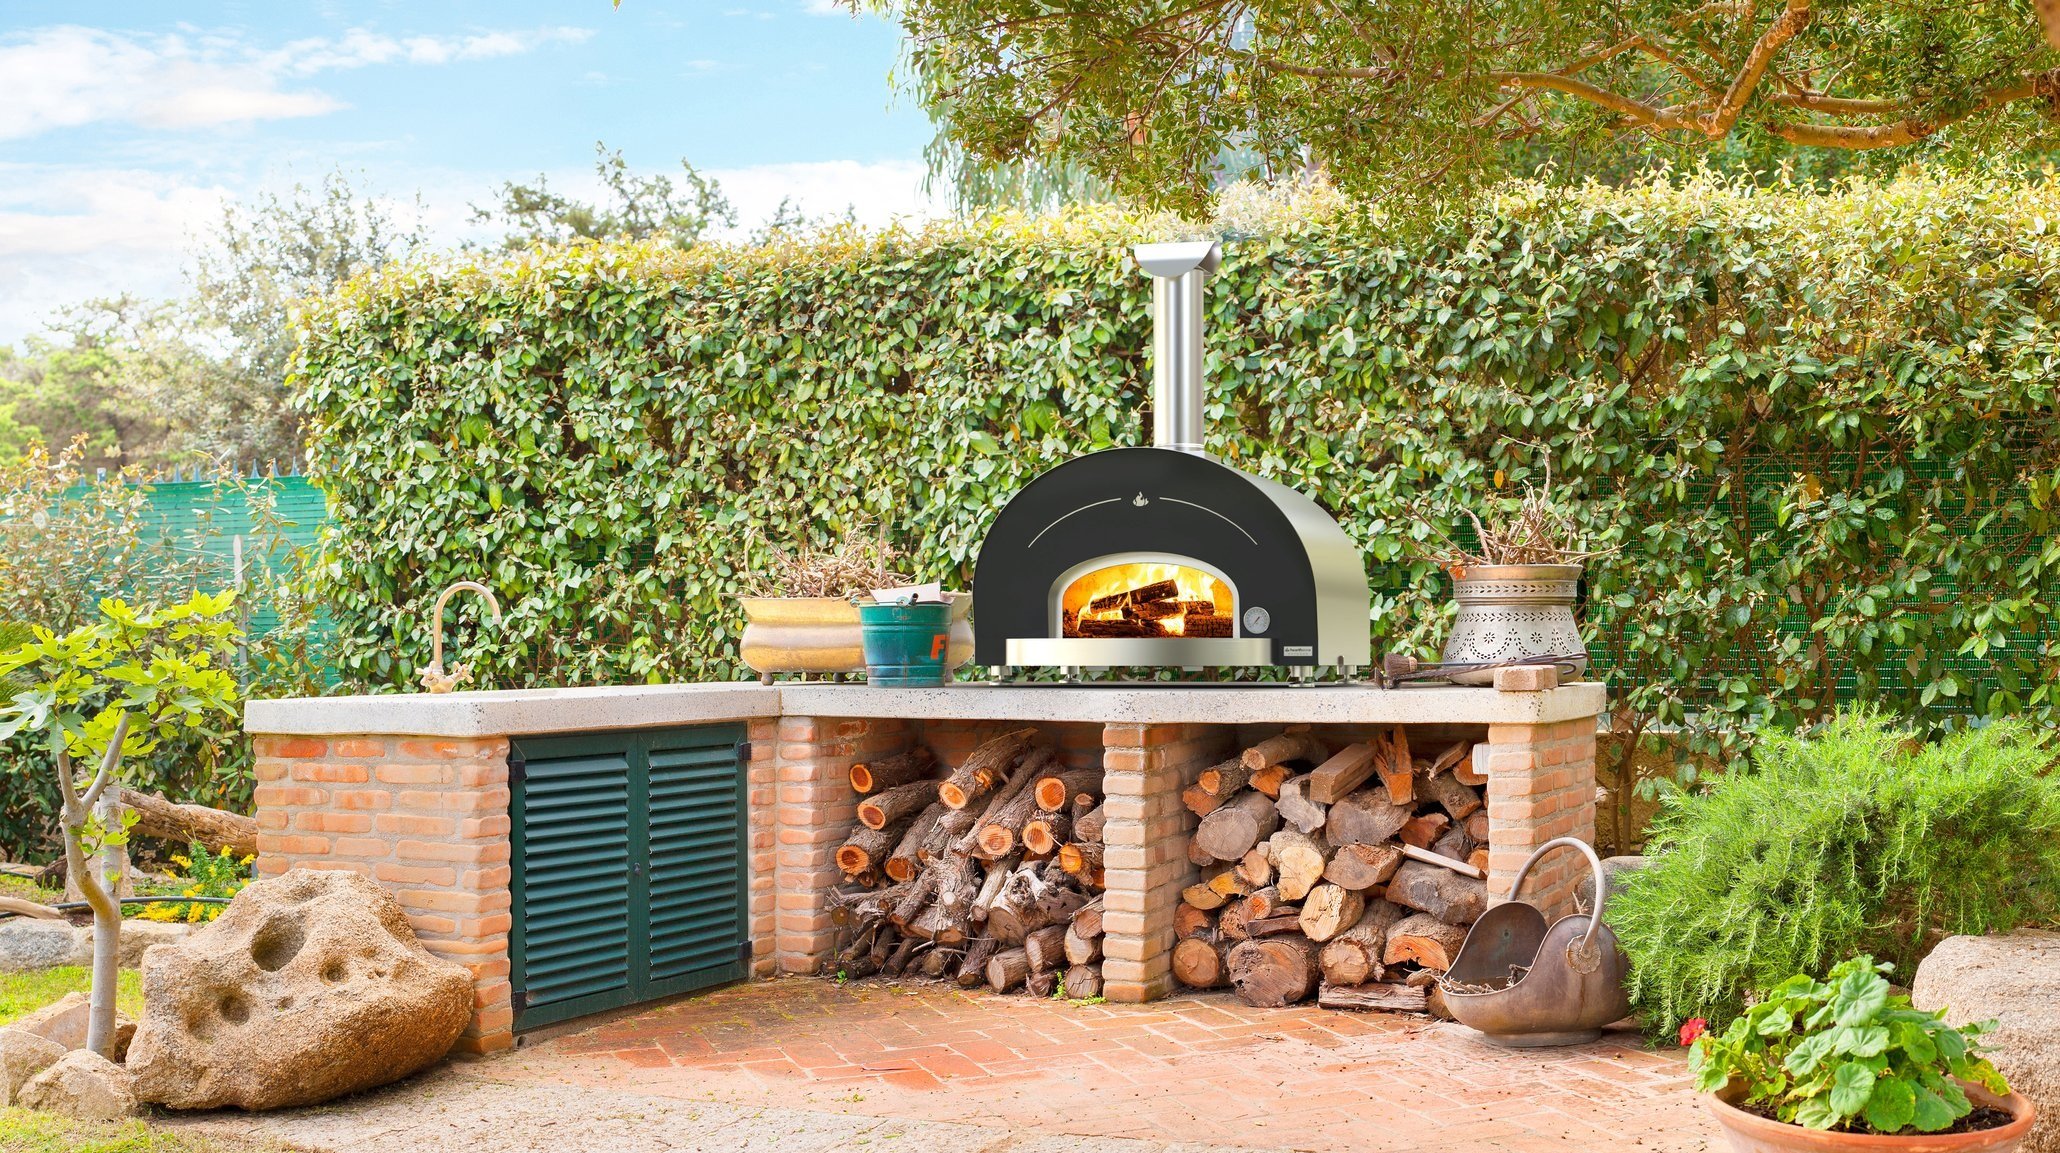 The HearthStone Outdoor wood-fired Pizza Oven is made in the USA